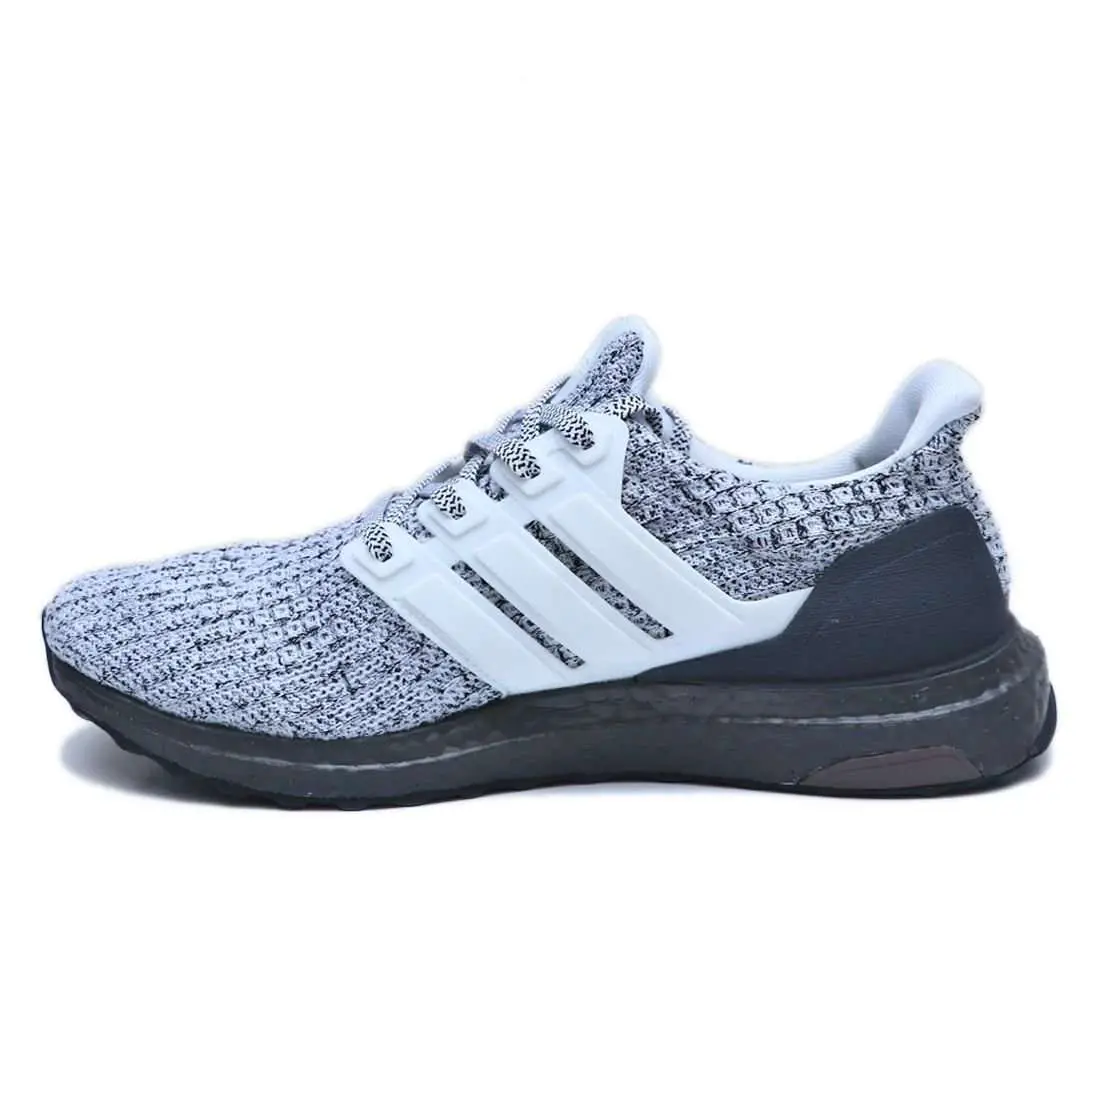 Adidas UltraBoost 4.0 White Running Shoes